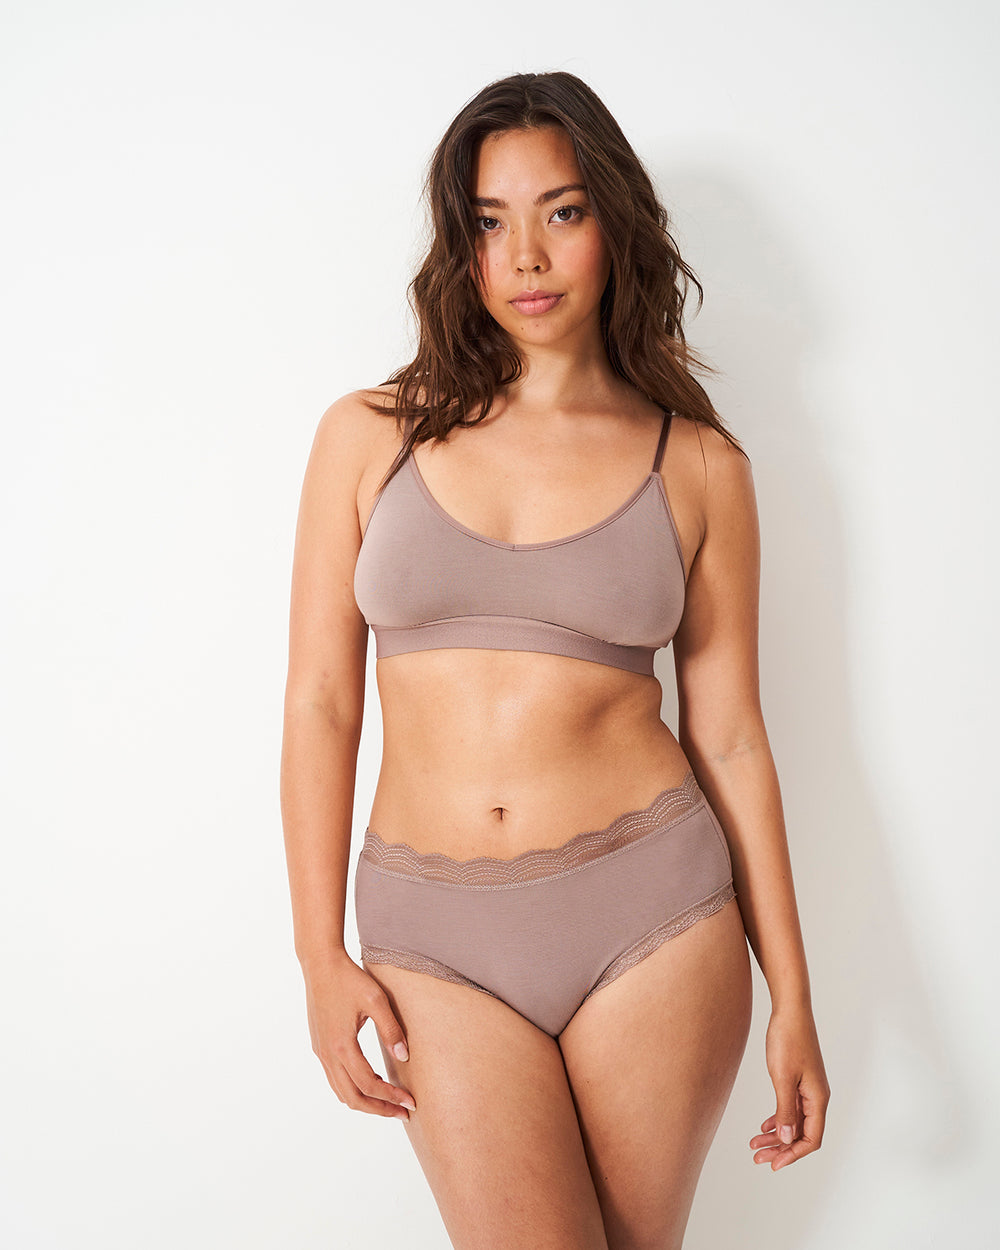 High Rise Knicker Four Pack - Taupe Stripe & Stare®